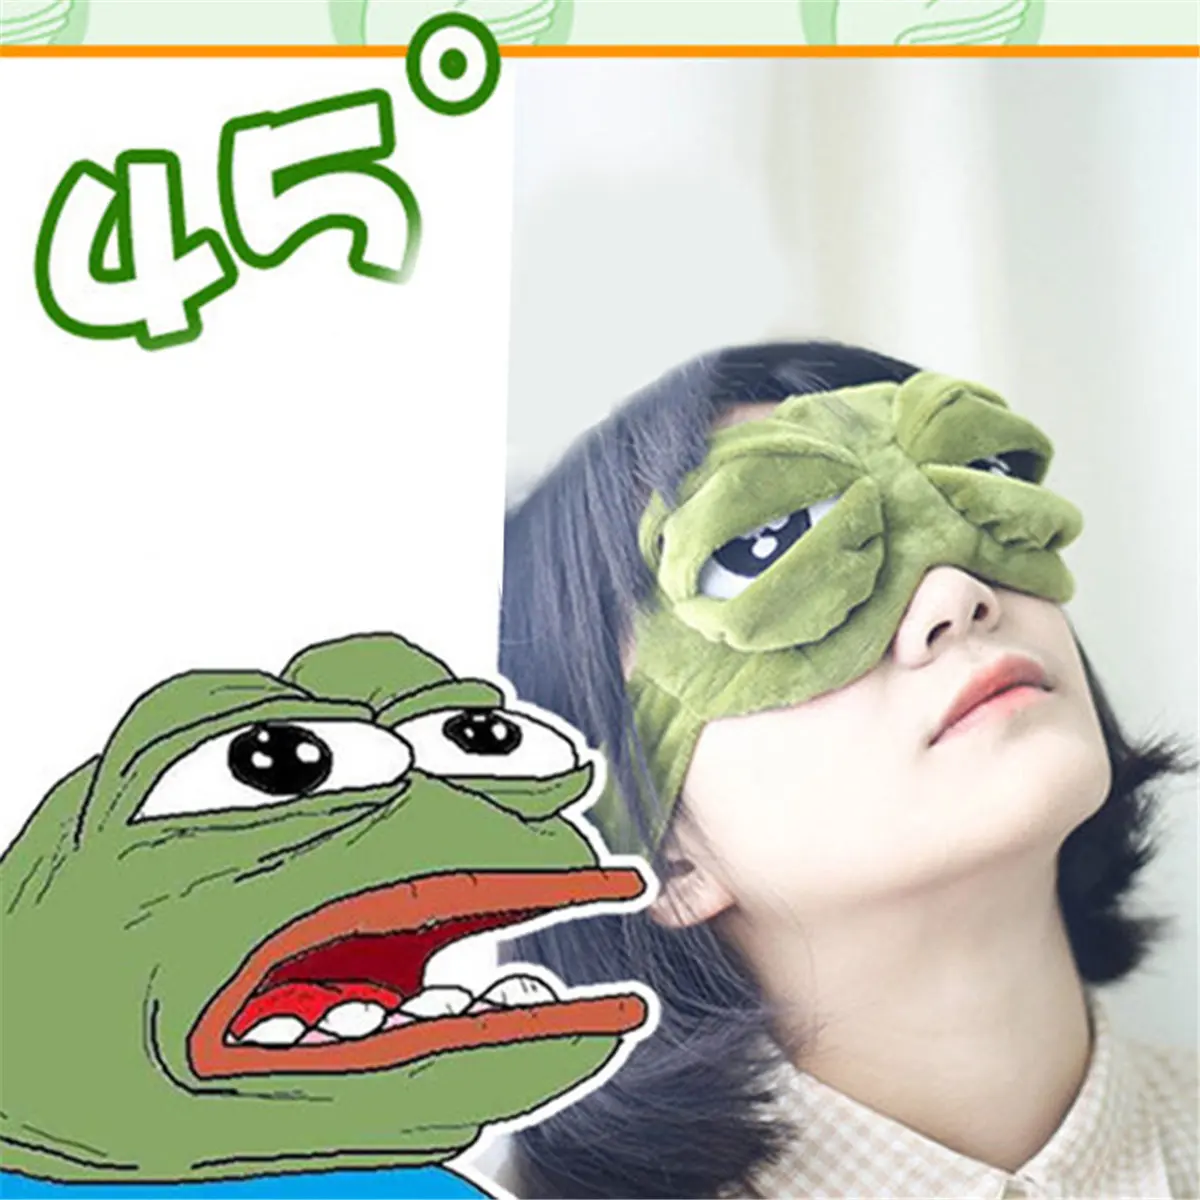 

3D Sad Frog Sleep Mask Rest Travel Relax Sleeping Aid Blindfold Ice Cover Eye Patch Sleeping Mask Case Anime Cosplay Costumes